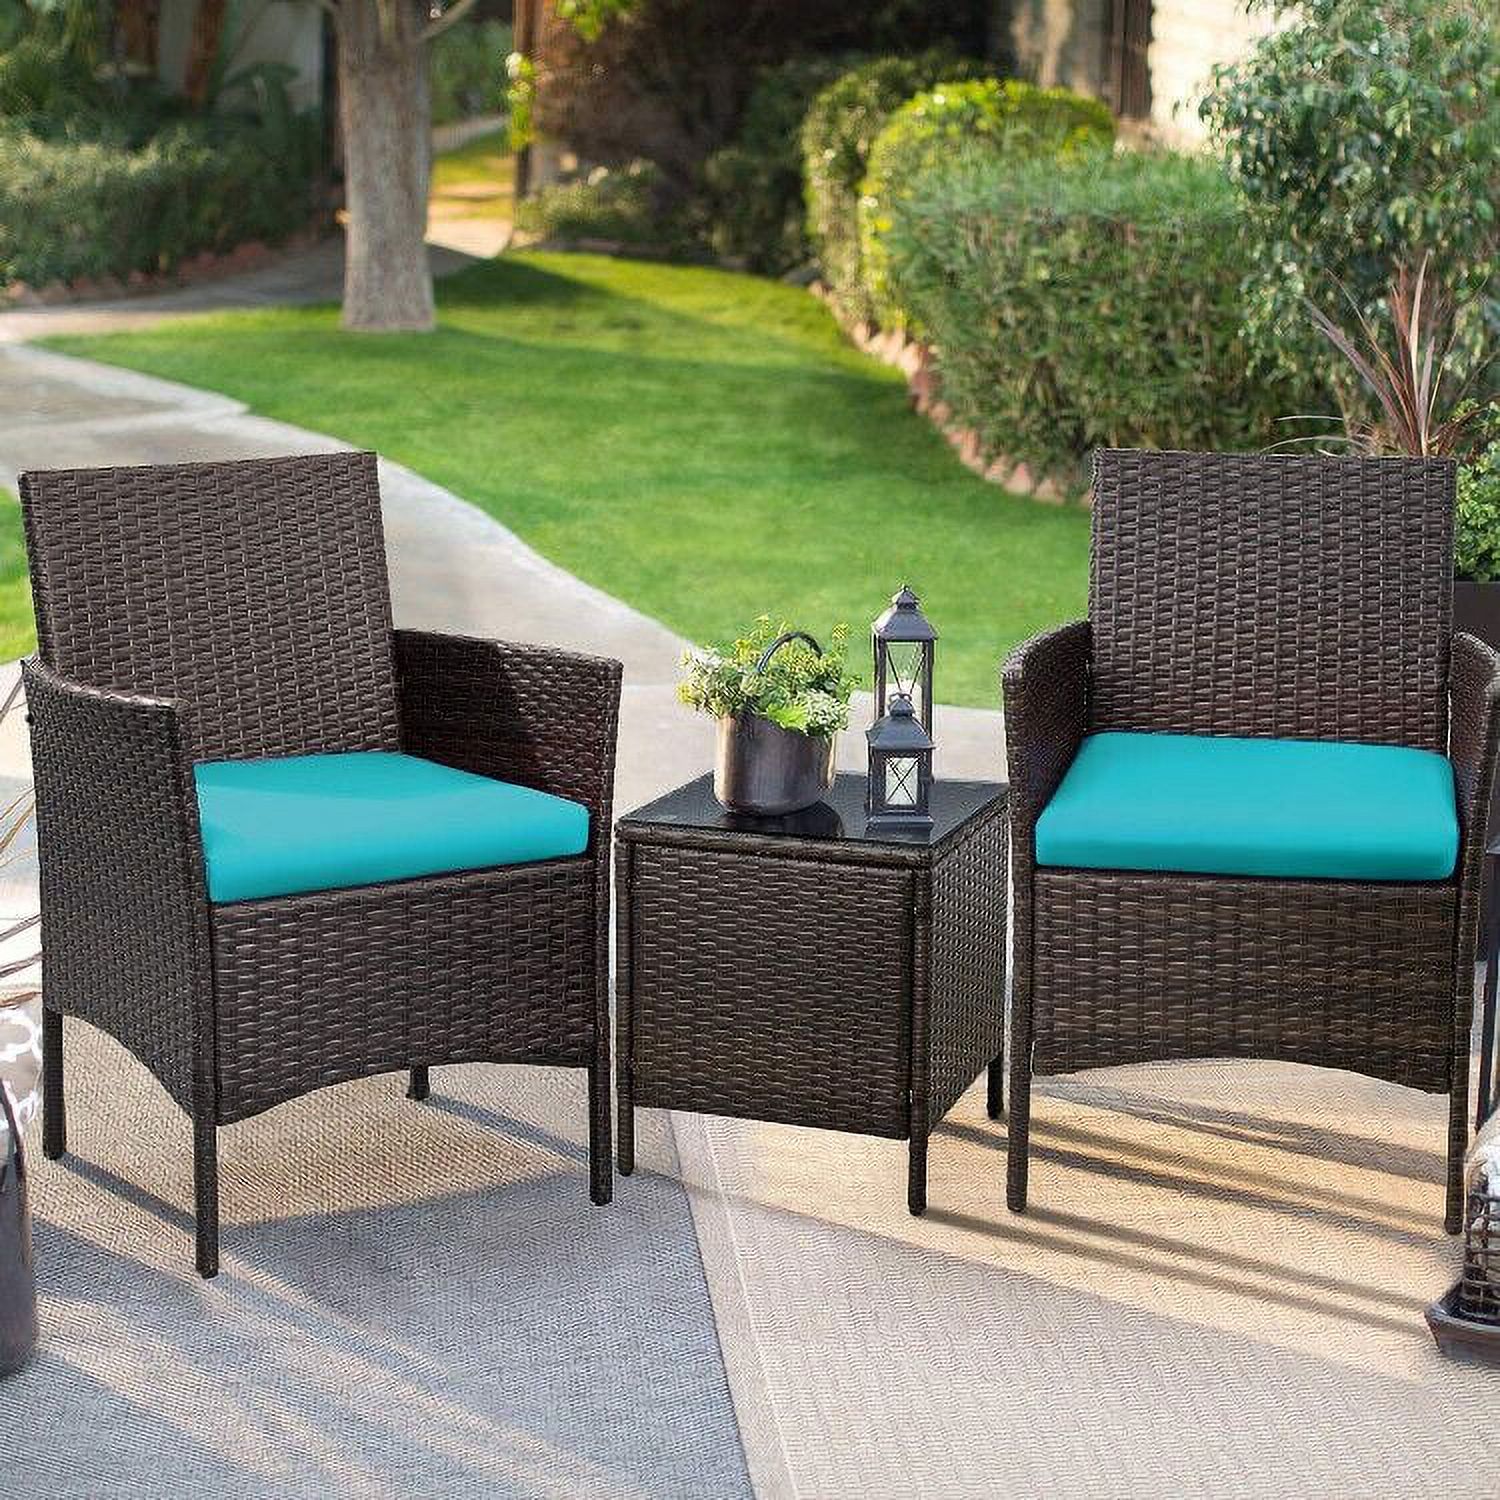 Lacoo 3 Pieces Outdoor Patio Furniture PE Rattan Wicker Table and Chairs Set Bar Set with Cushioned Tempered Glass (Brown / Blue) - image 1 of 7